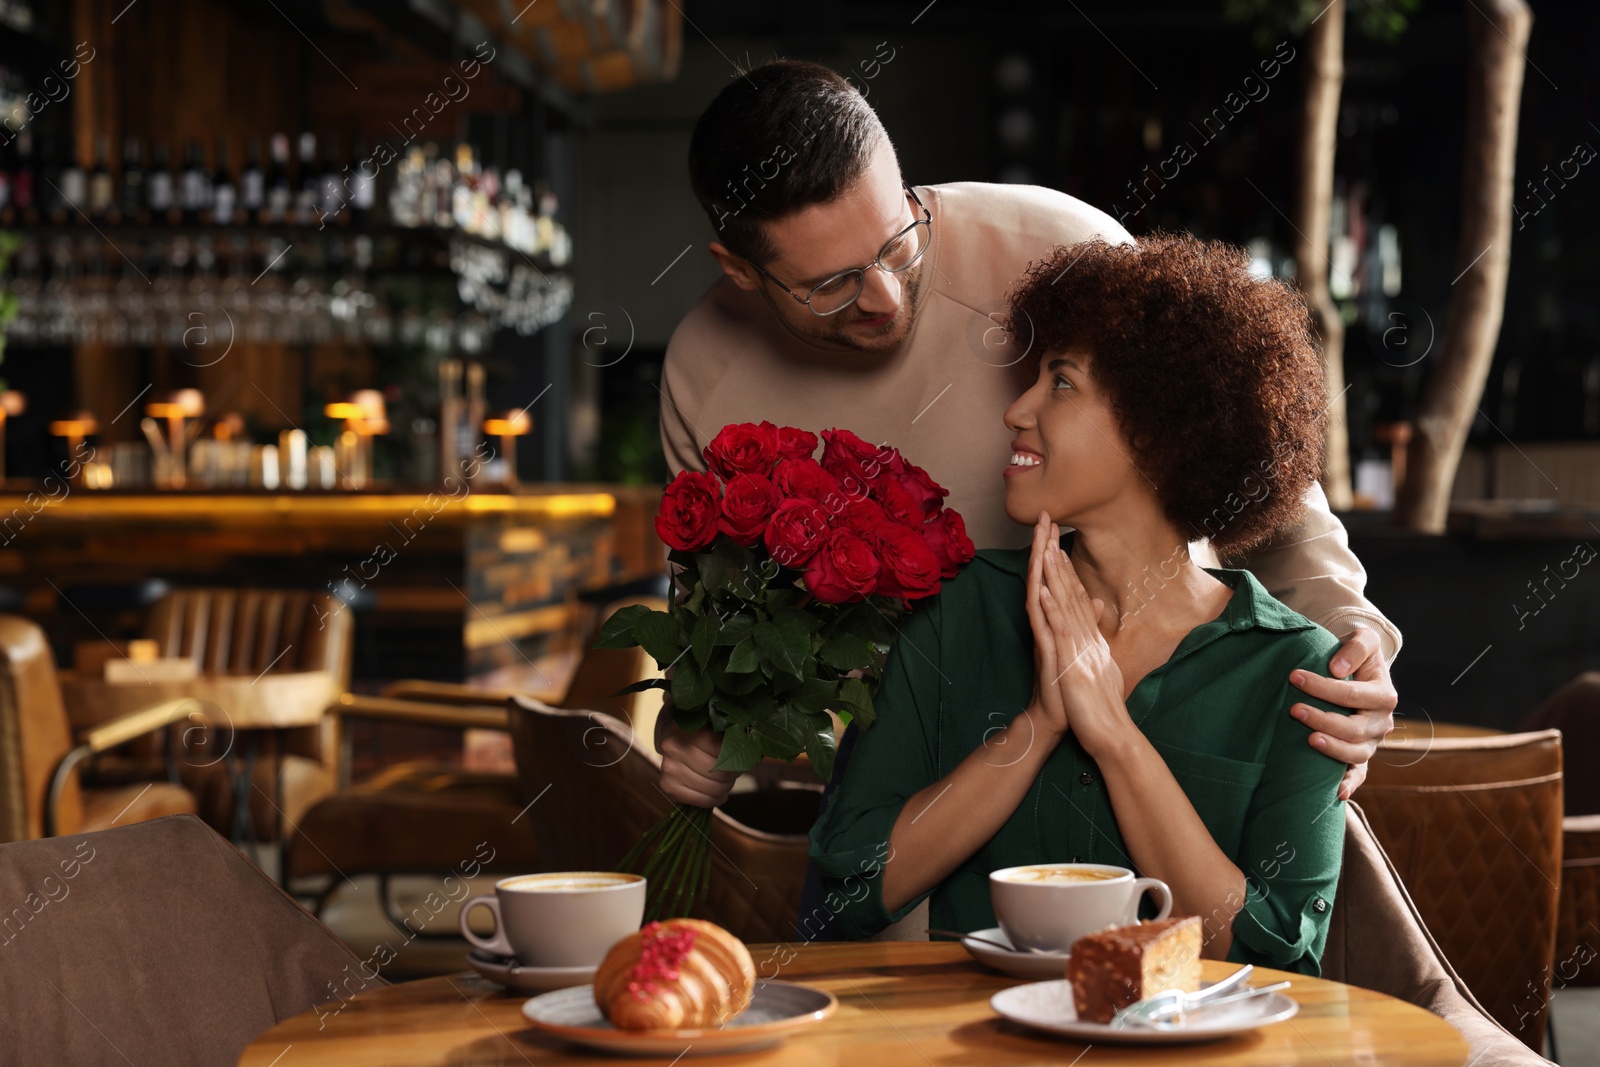 Photo of International dating. Handsome man presenting roses to his girlfriend in restaurant, space for text